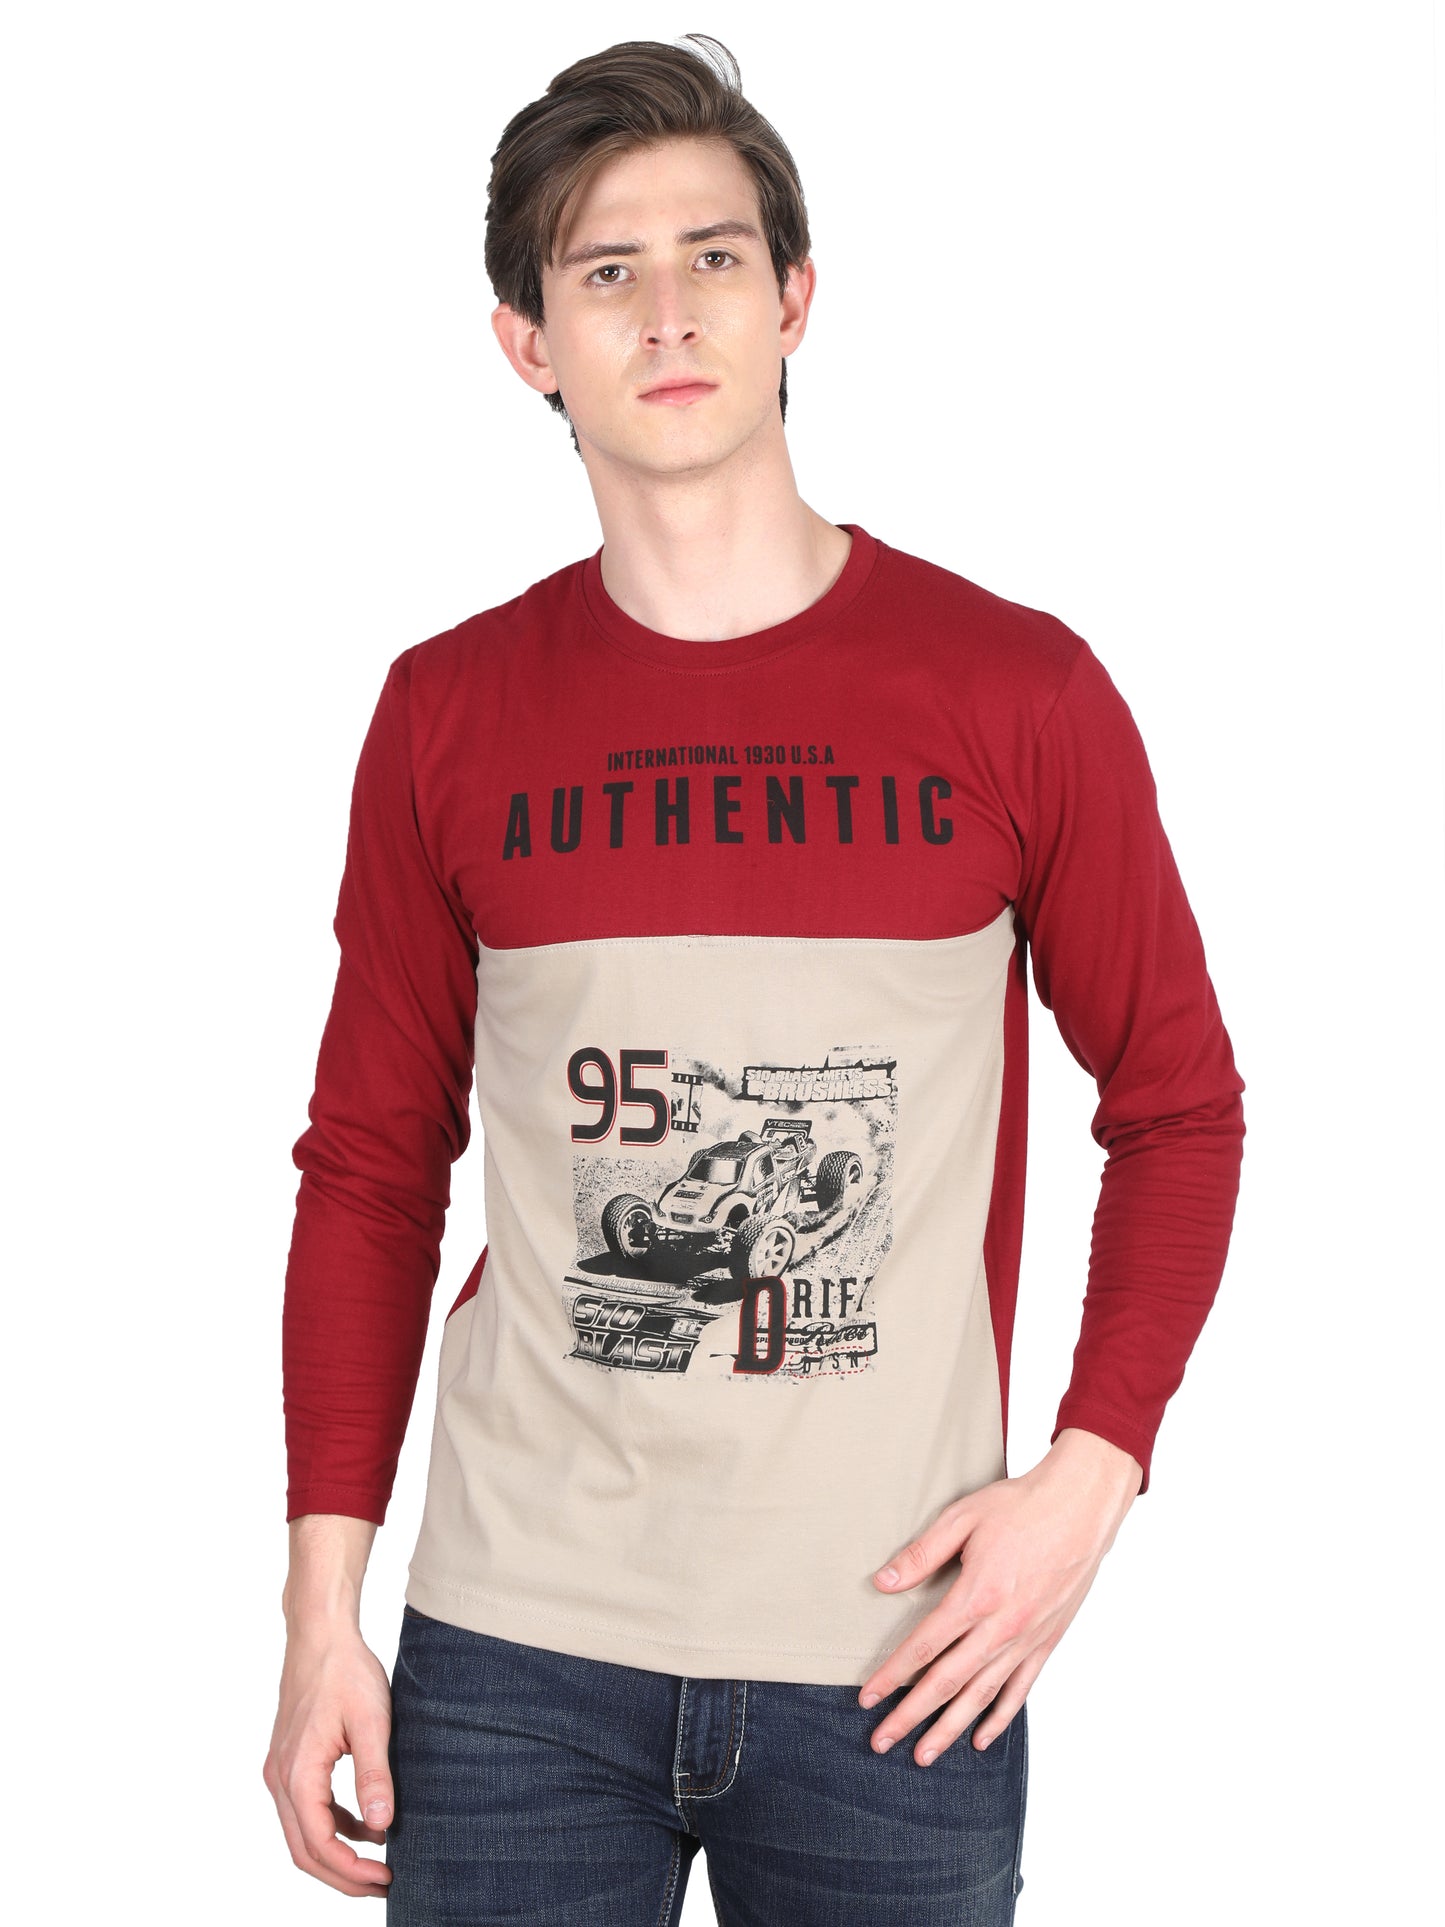 Men's Cotton Color Block Printed Round Neck Full Sleeve T-Shirt